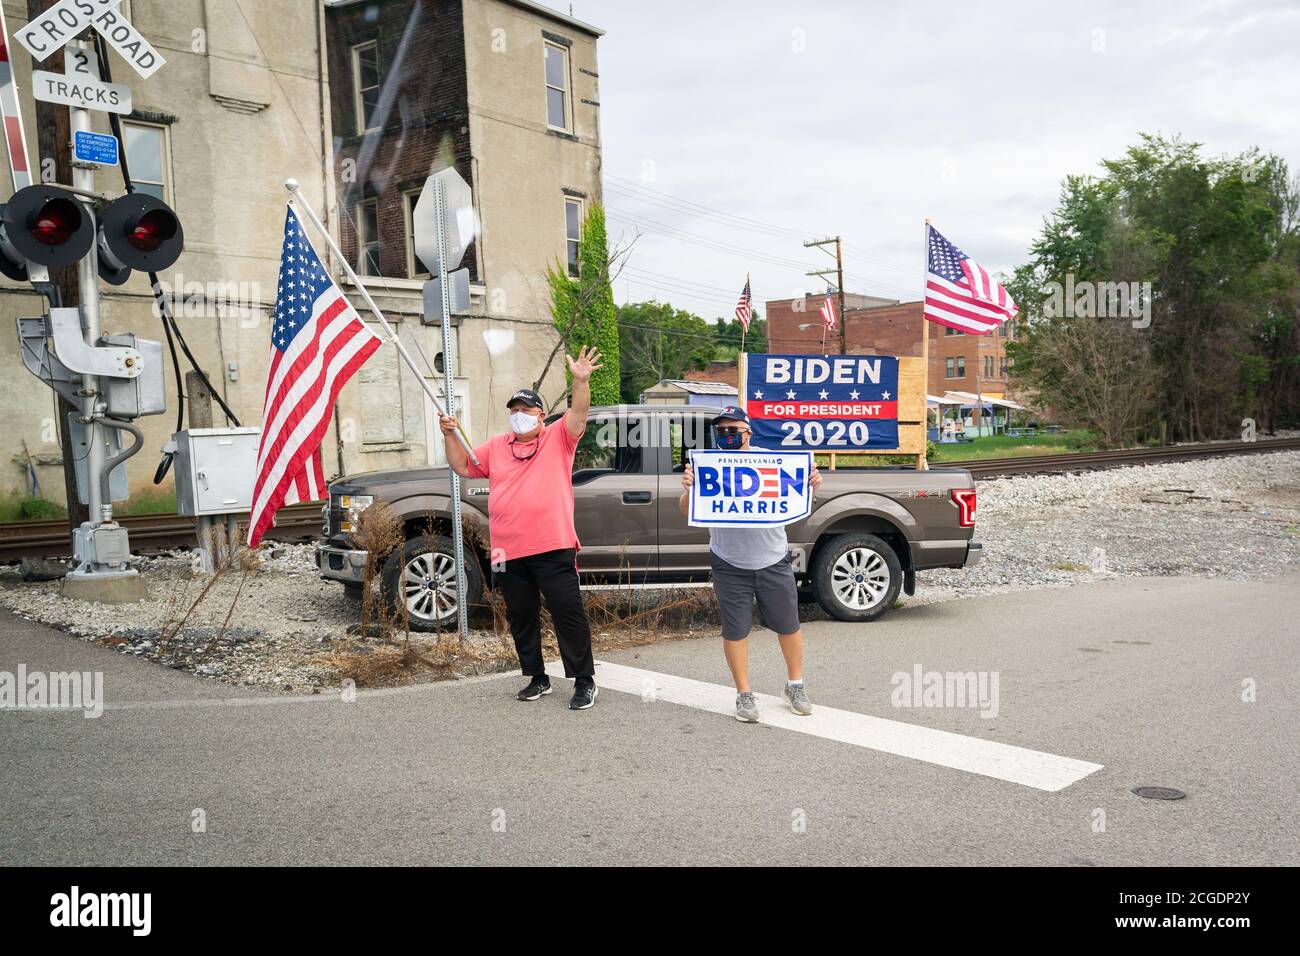 PITTSBURGH, PA, USA - 31 August 2020 - The Democratic US presidential candidate Joe Biden on the campaign trail on a visit titled 'The Case Against Tr Stock Photo